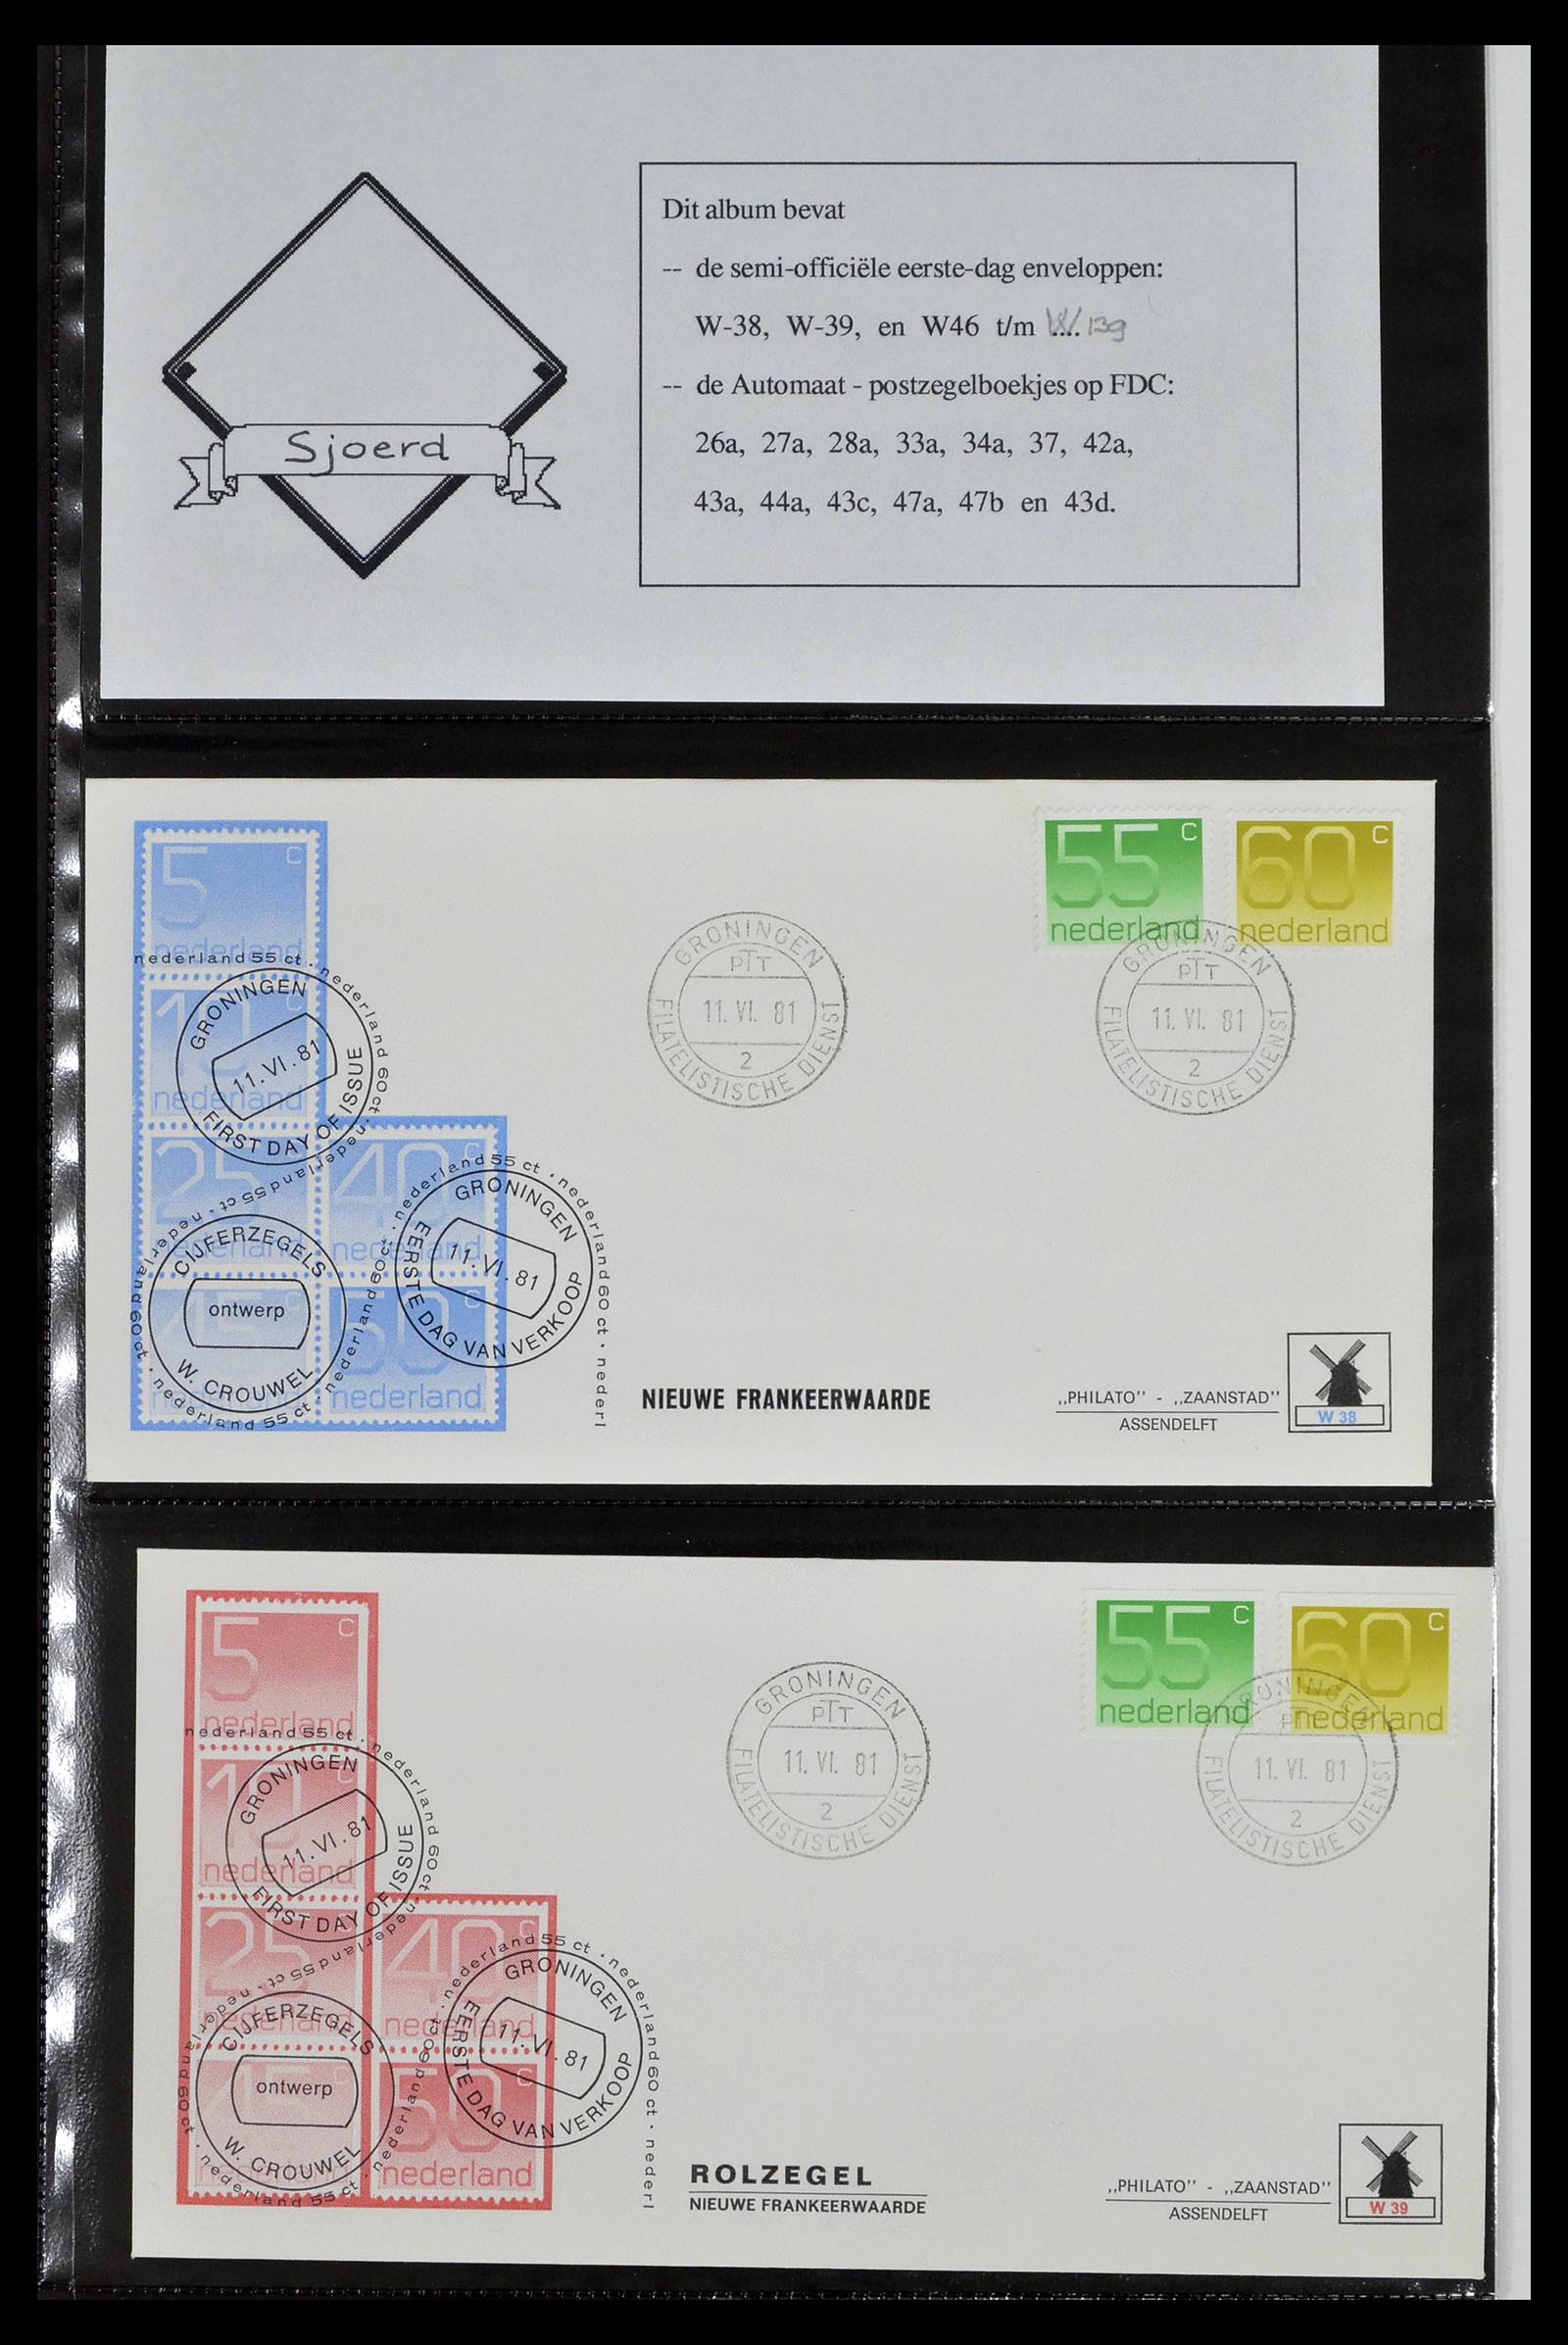 38559 0509 - Stamp collection 38559 Netherlands special first day covers.